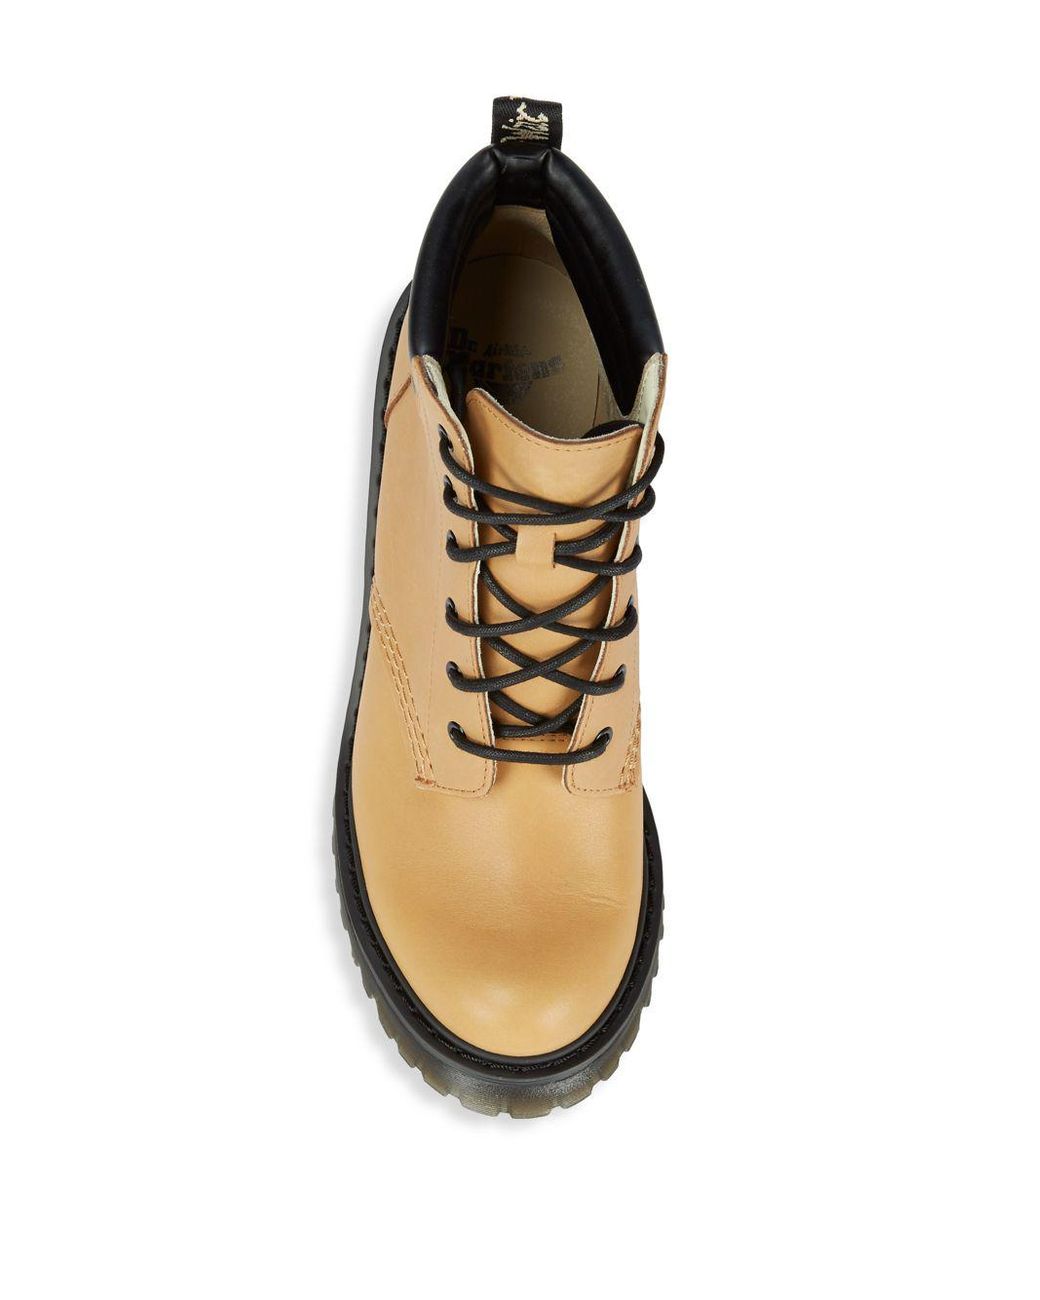 Dr. Martens Persephone Leather Boots in Tan (Brown) | Lyst